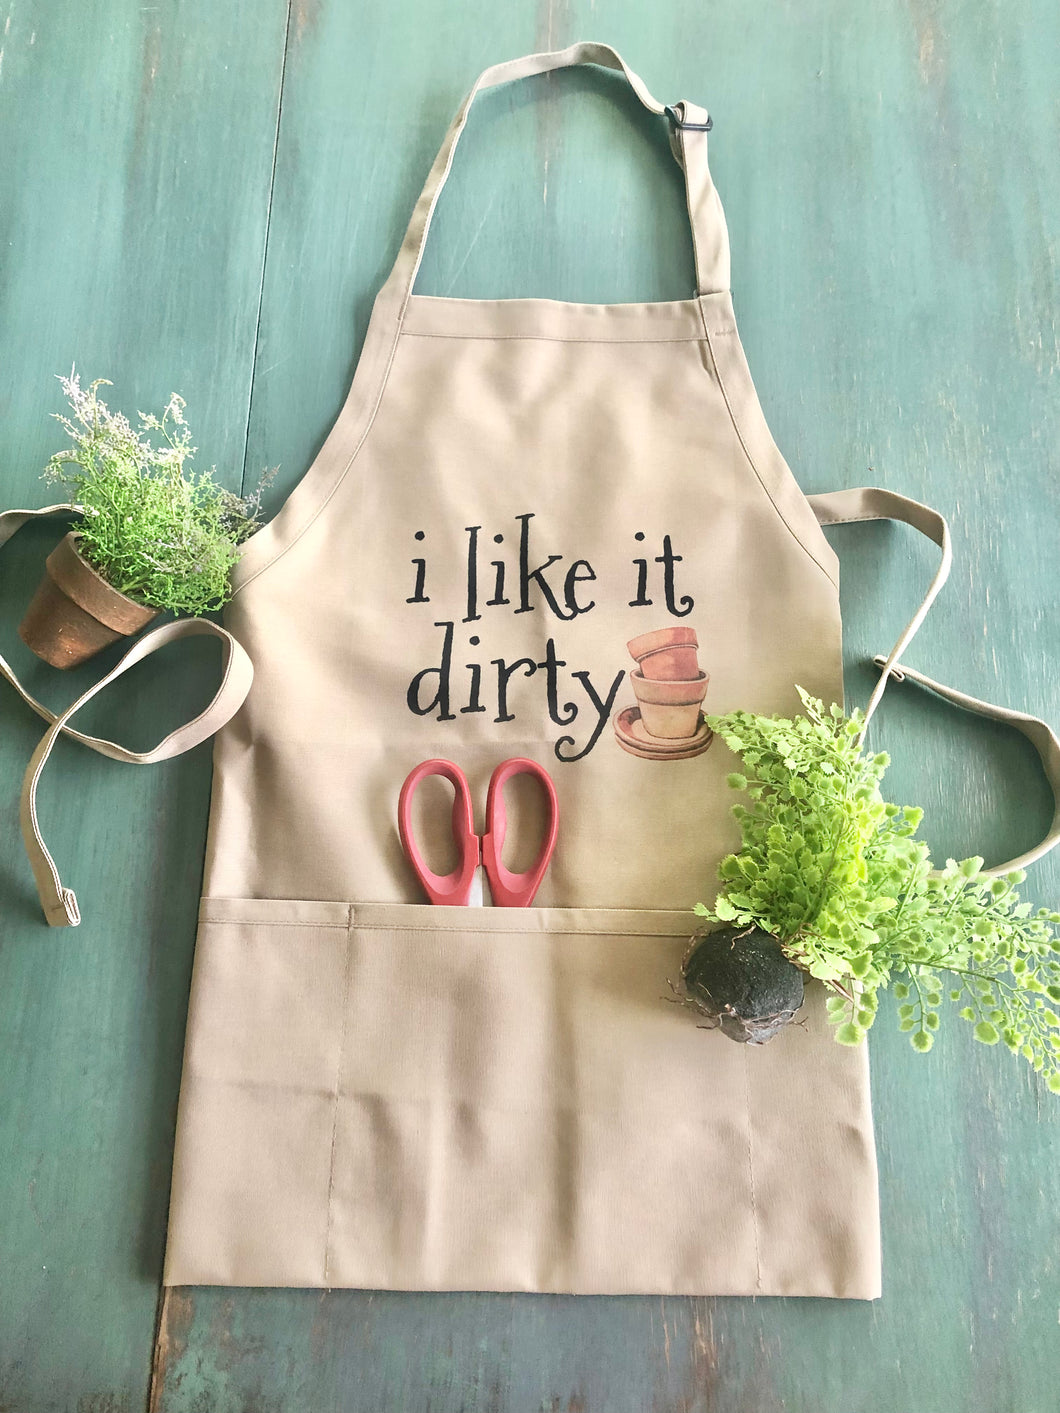 Funny Garden Apron, i like it dirty, Three Pocket Garden Apron, Gift for Her, Gift for Gardener, Gardening Apron, Mother's Day Gift